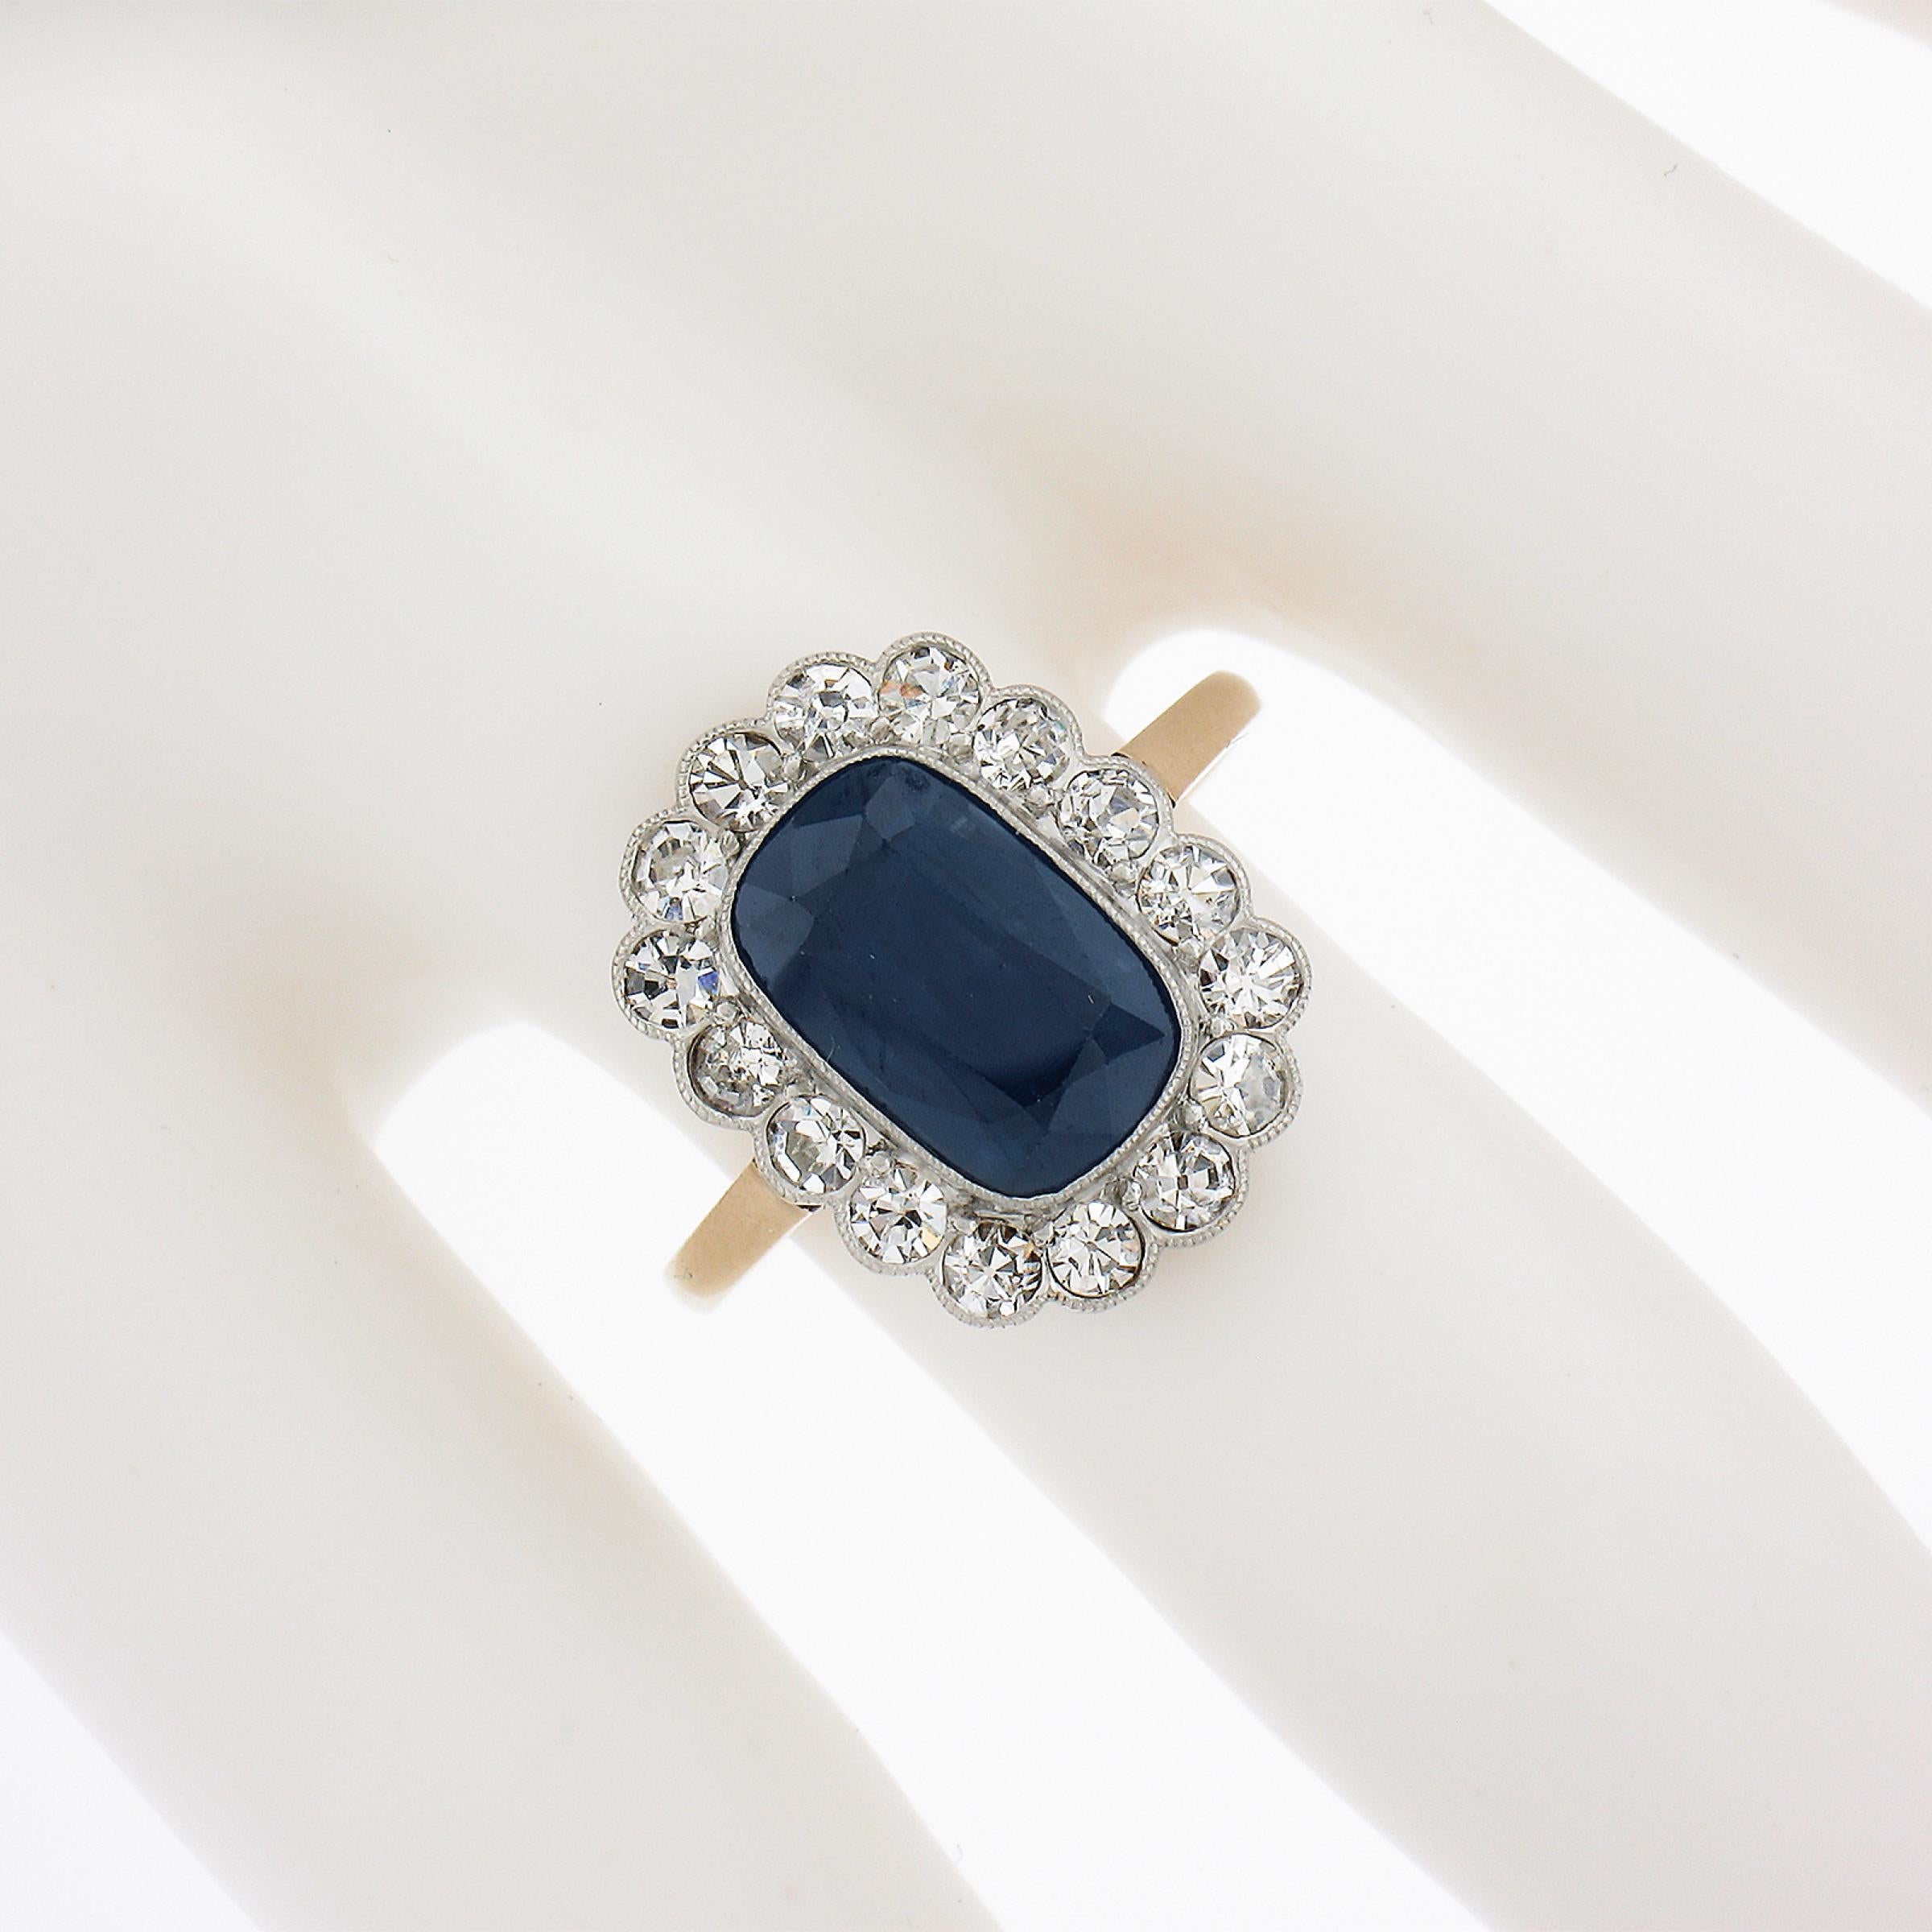 Antique Edwardian 14K Gold & Platinum 3.60ctw GIA Sapphire Diamond Halo Ring In Excellent Condition For Sale In Montclair, NJ